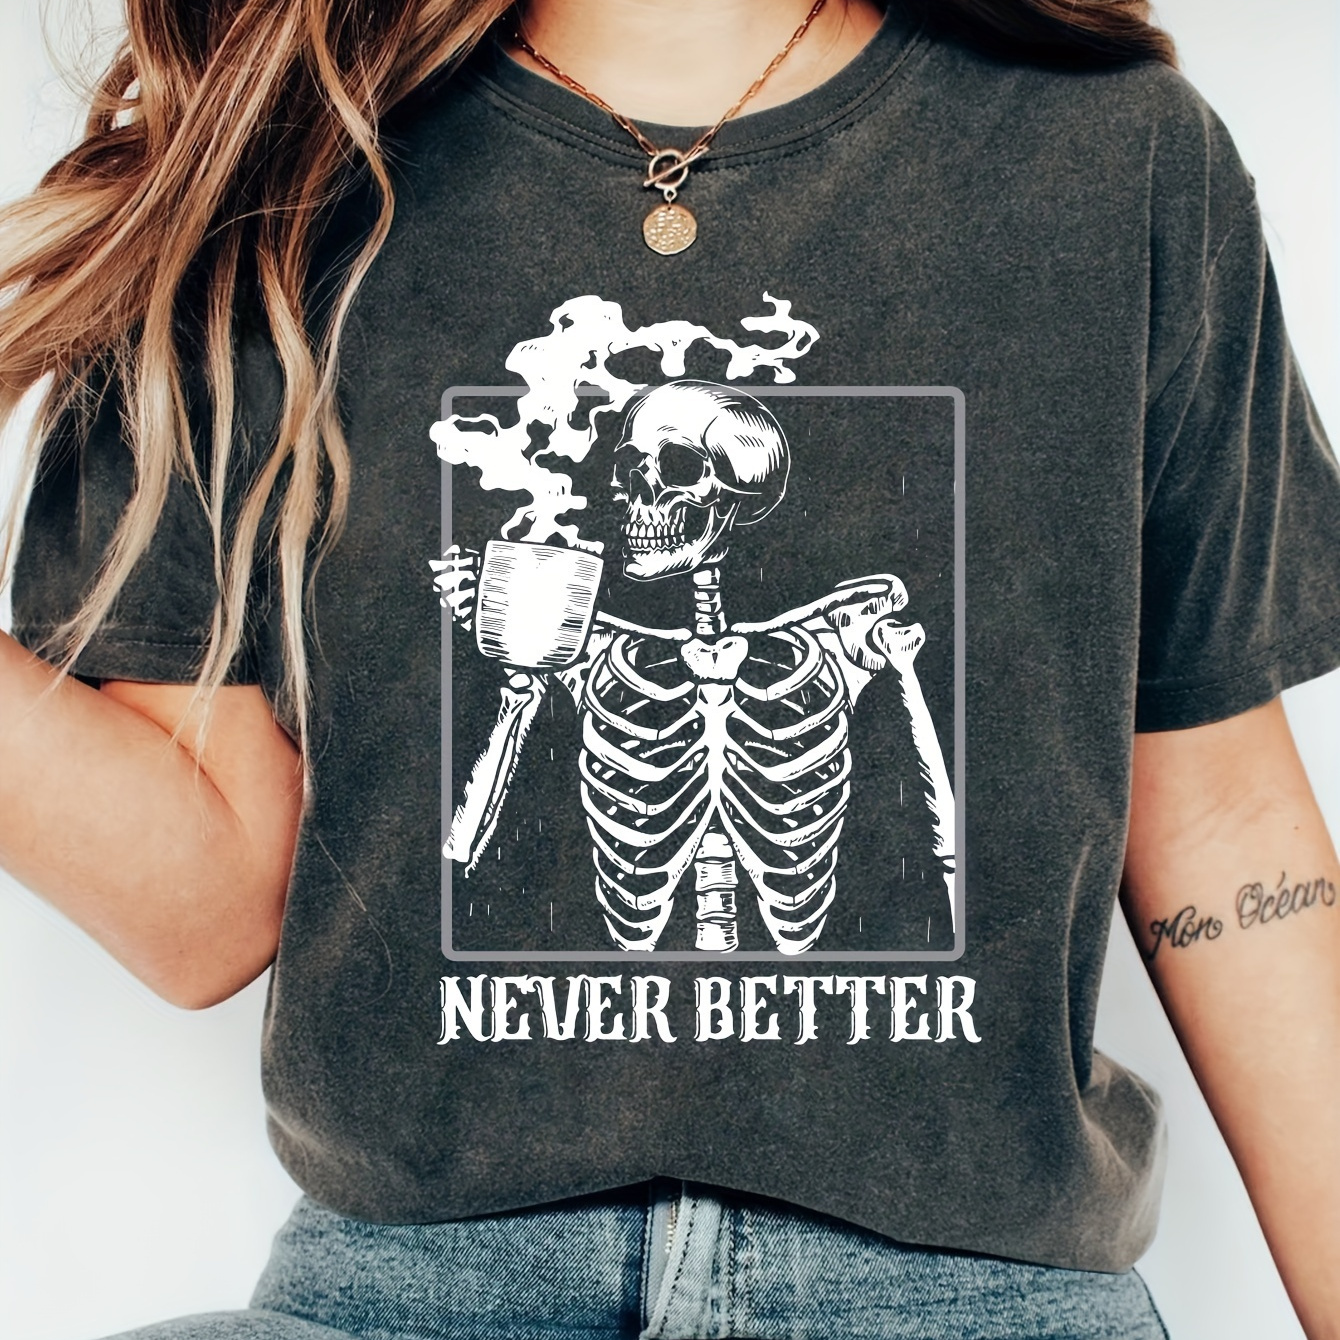 

Skeleton Print Crew Neck T-shirt, Short Sleeve Casual Top For Spring & Summer, Women's Clothing